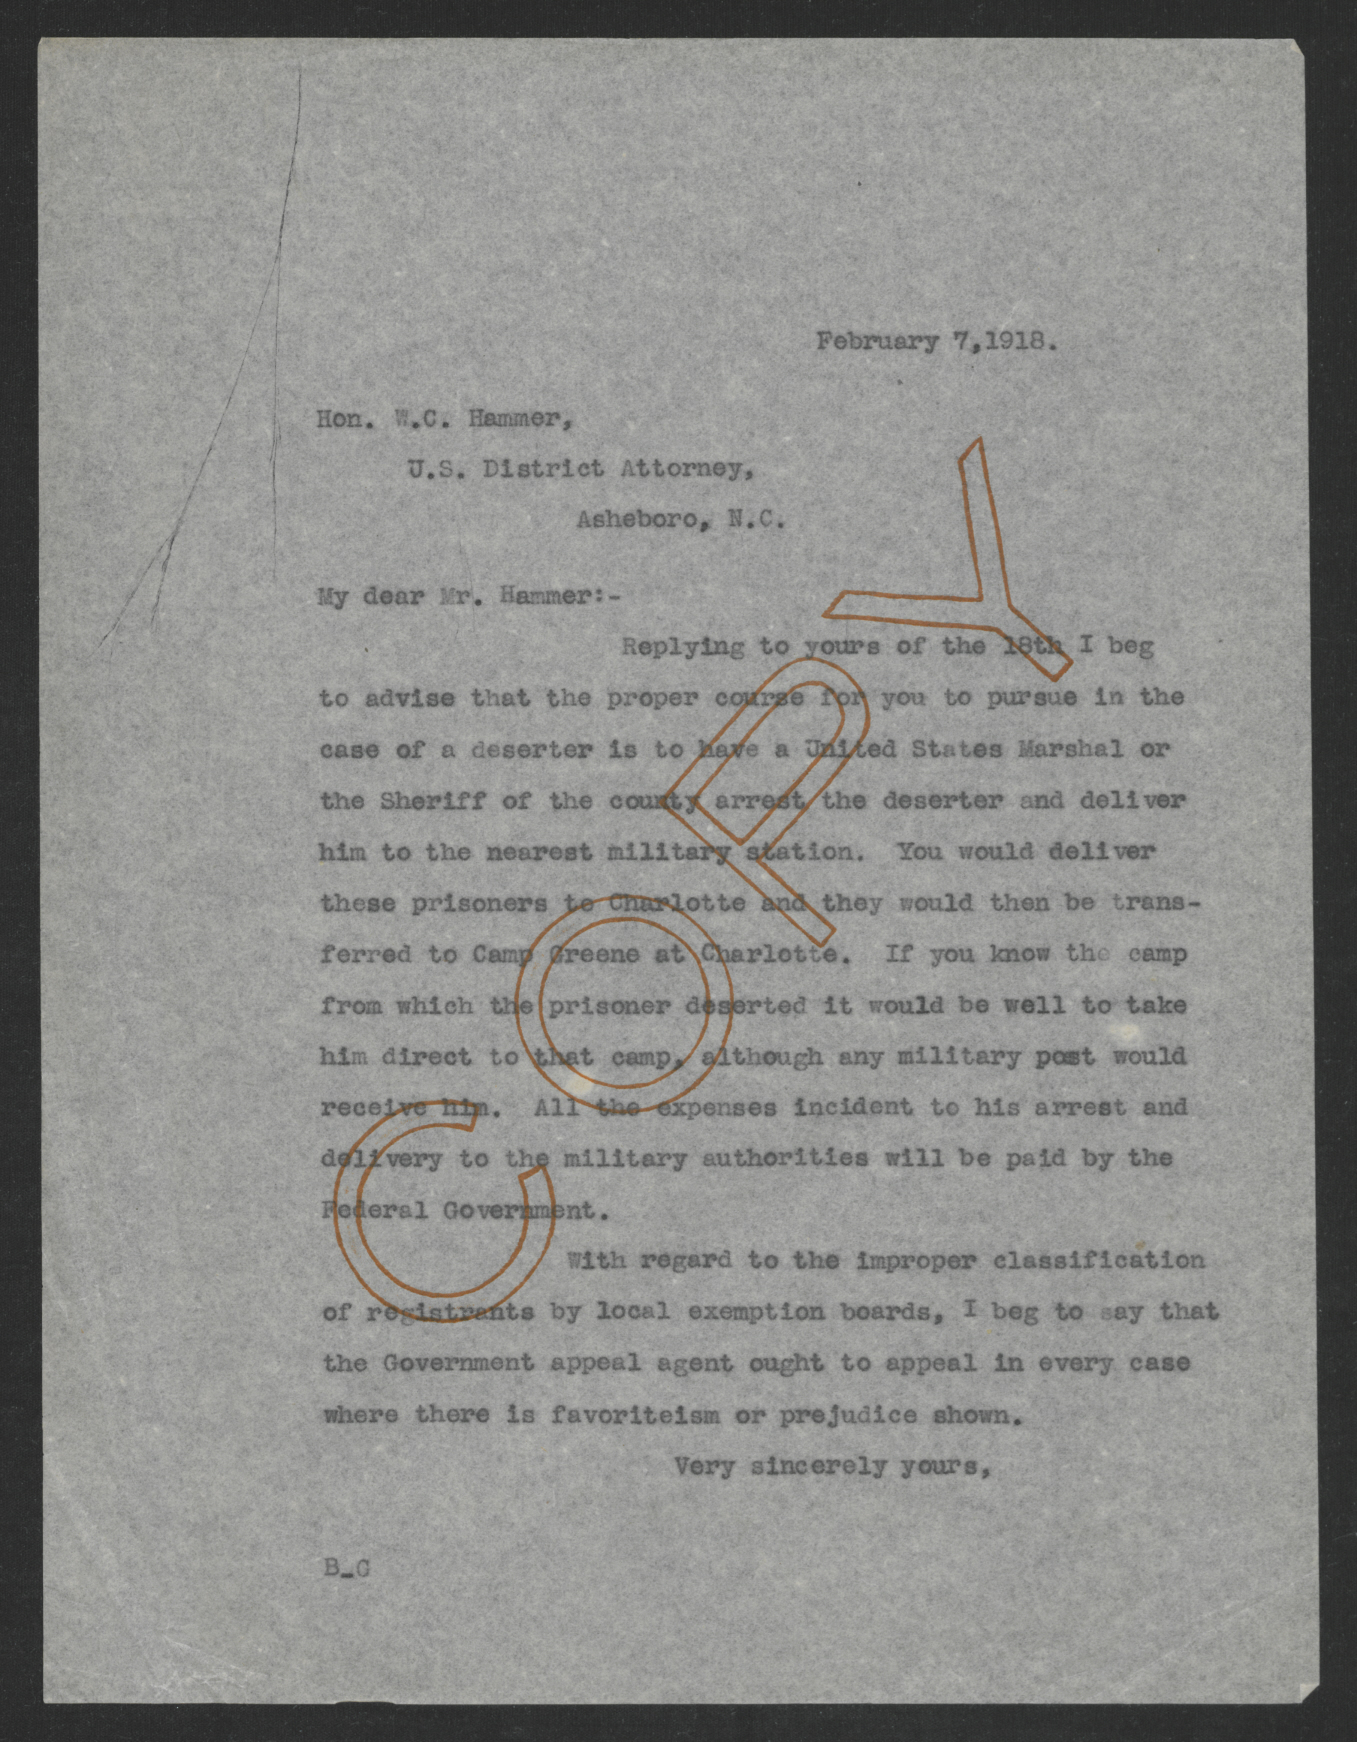 Letter from Thomas W. Bickett to William C. Hammer, February 7, 1918